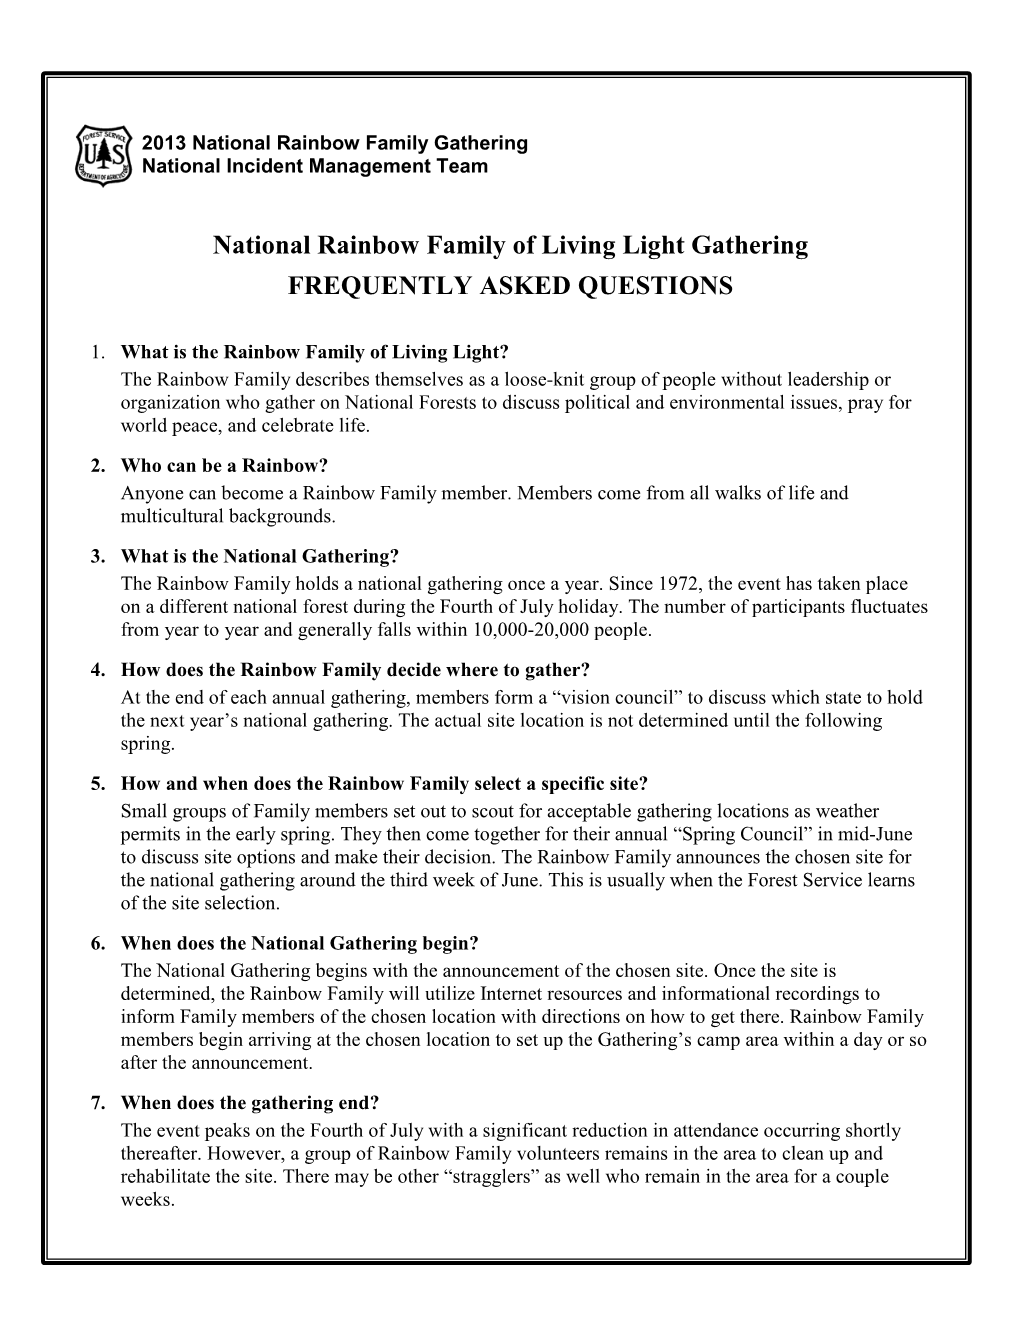 National Rainbow Family of Living Light Gathering FREQUENTLY ASKED QUESTIONS